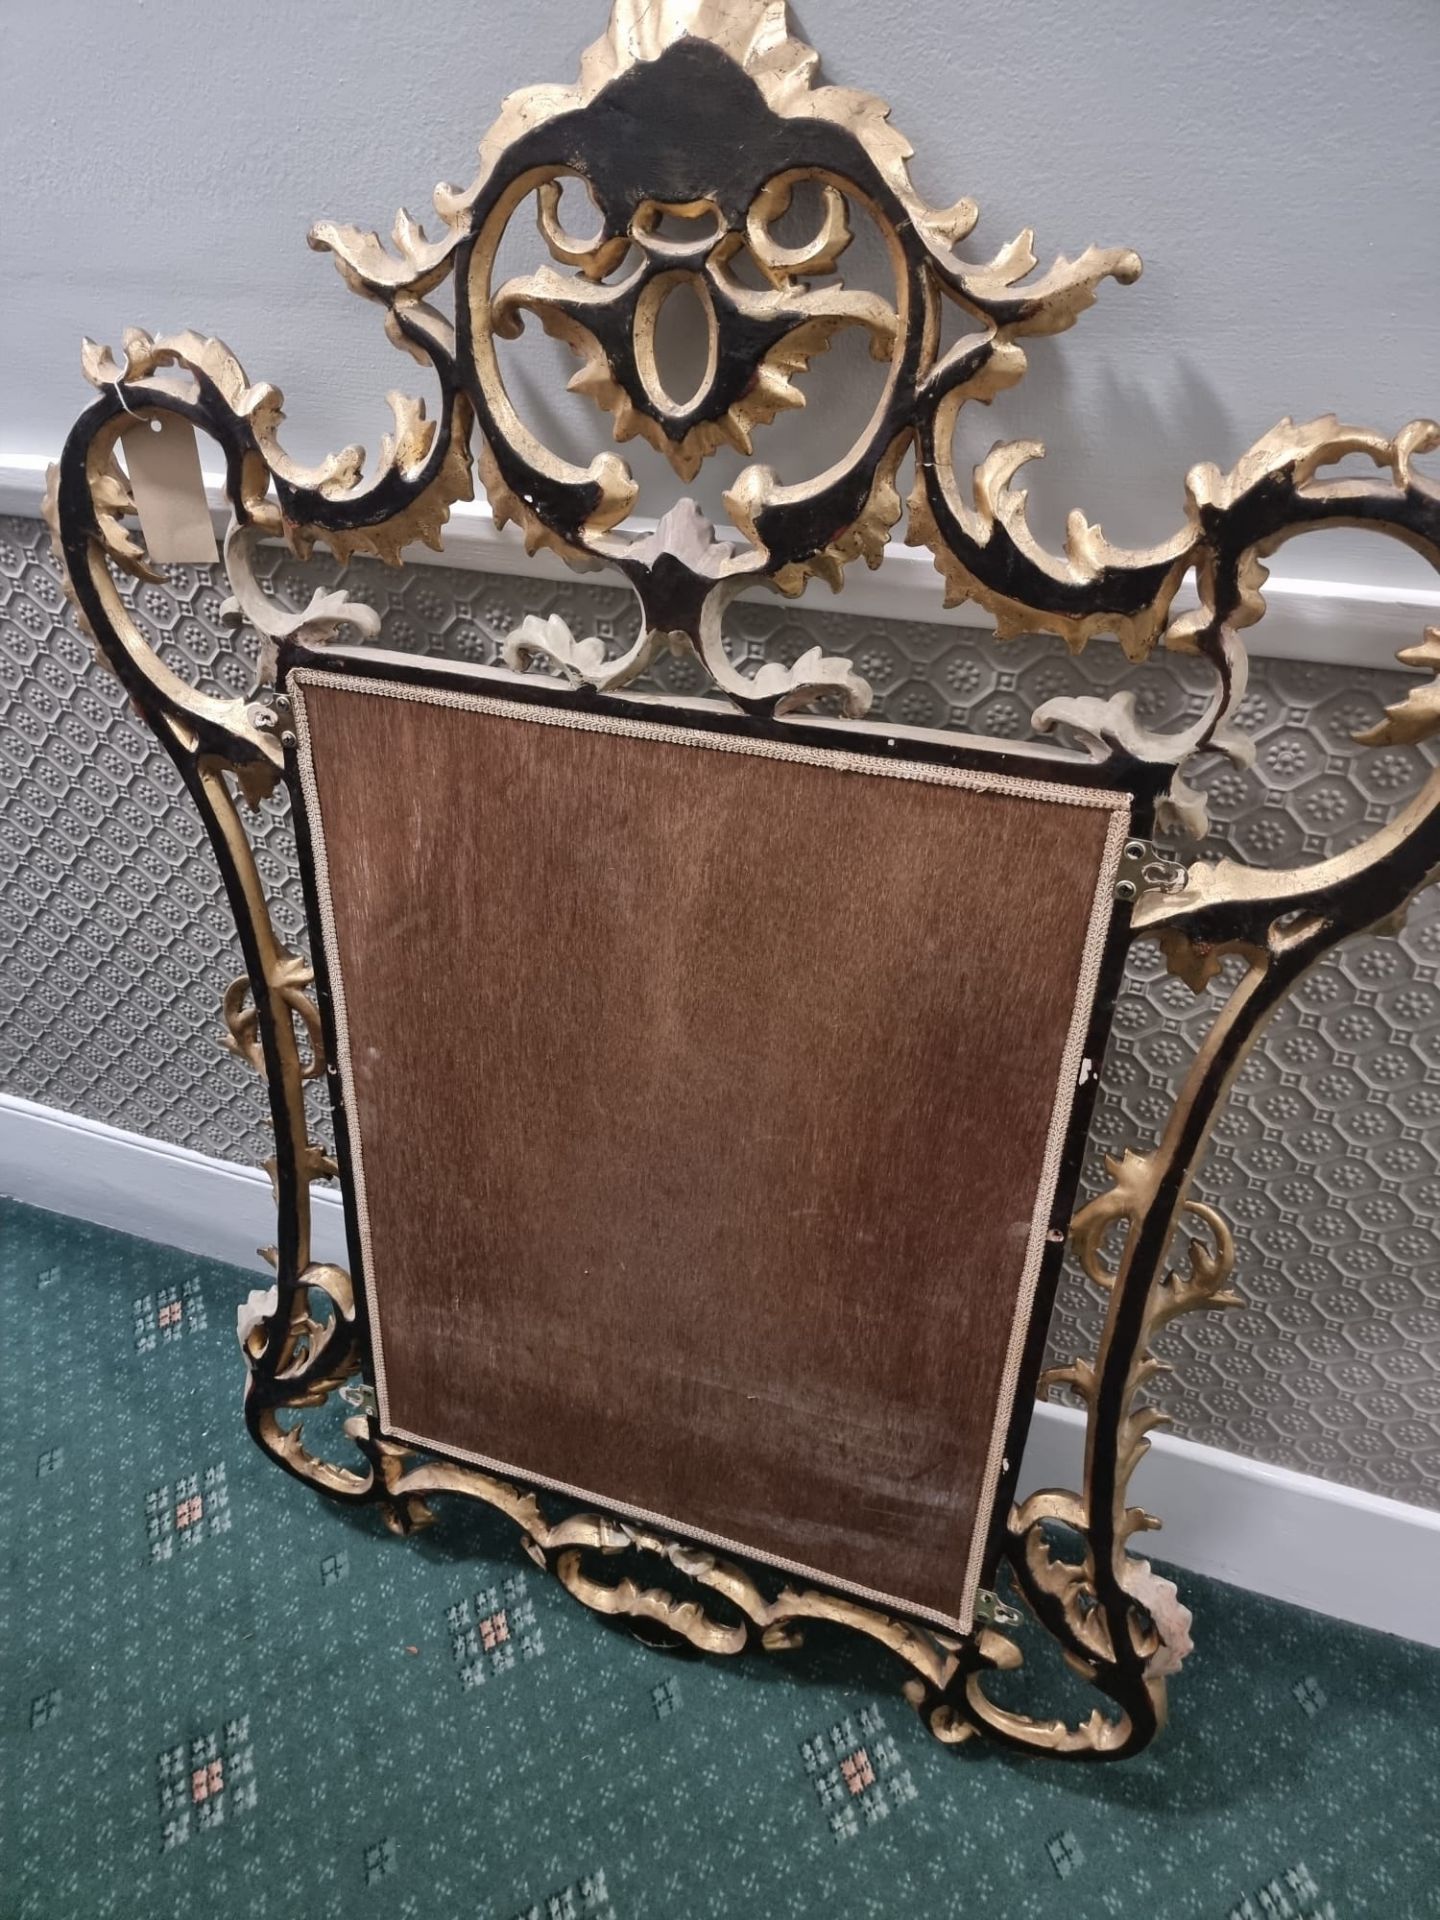 Monumental Louis XV Style Gilt Pier Mirror  Carved And Gilt Overmantle Or Pier Mirror. Original - Image 5 of 5